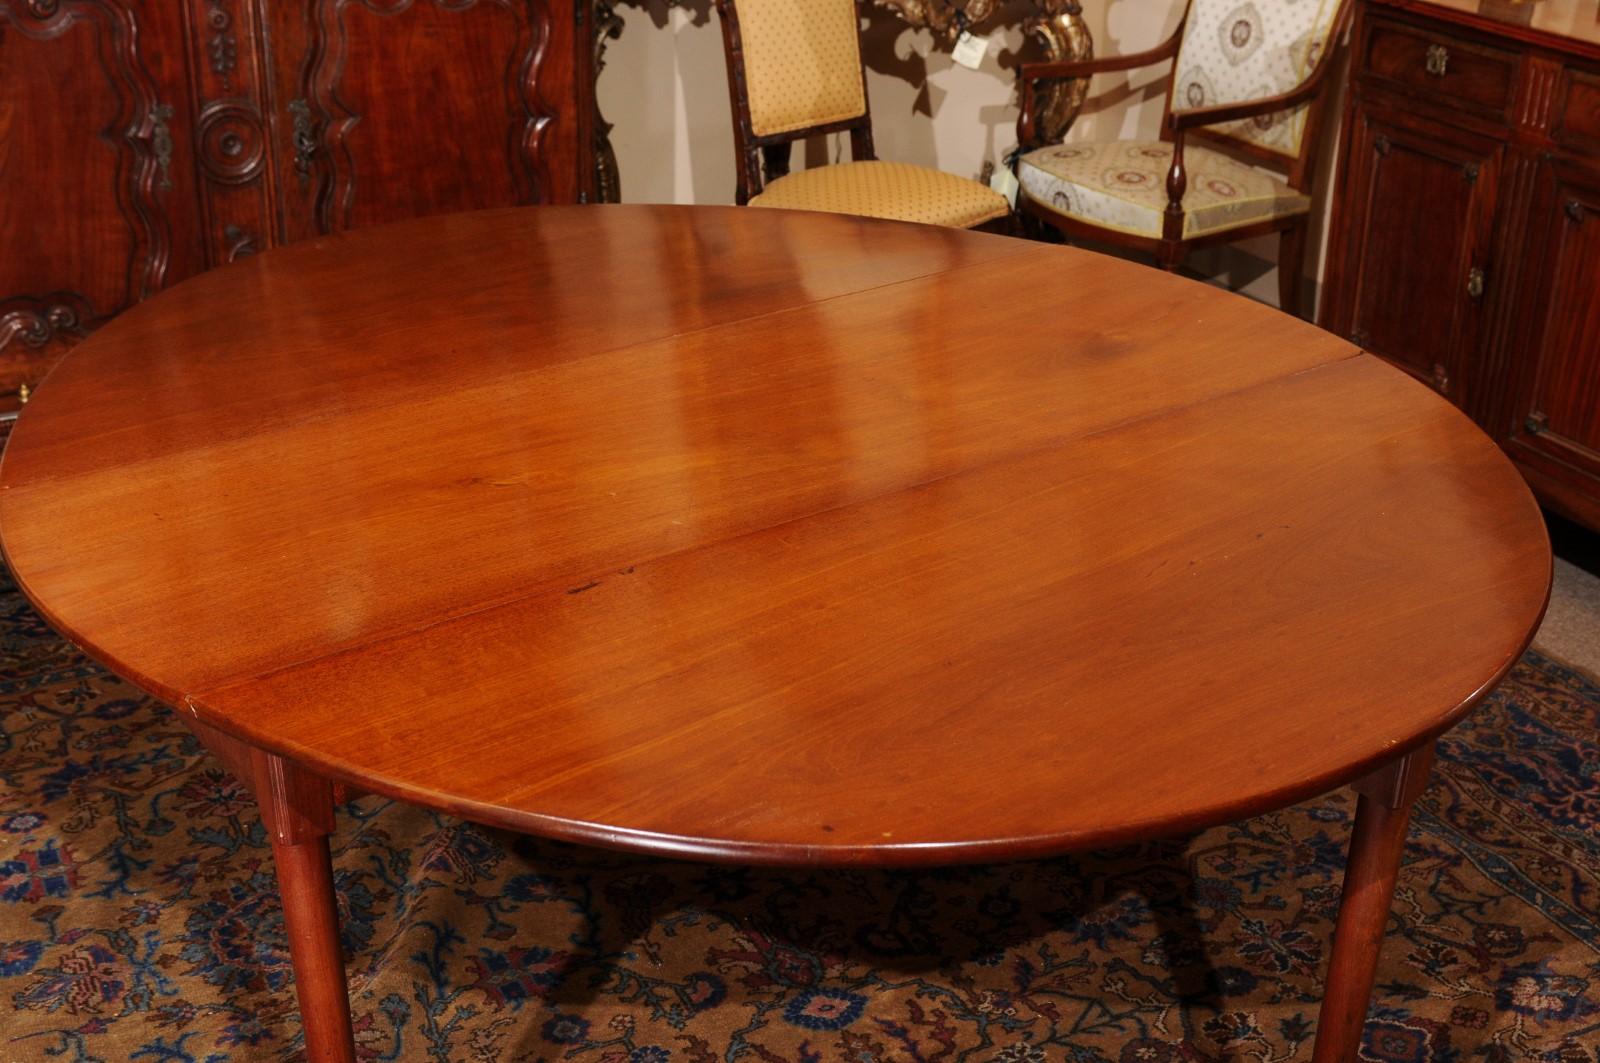 XVIIIe siècle  Mid-18th C English George II Mahogany Drop Leaf Oval Dining Table with Pad Feet (Table de salle à manger ovale à feuilles tombantes et pieds pad) en vente